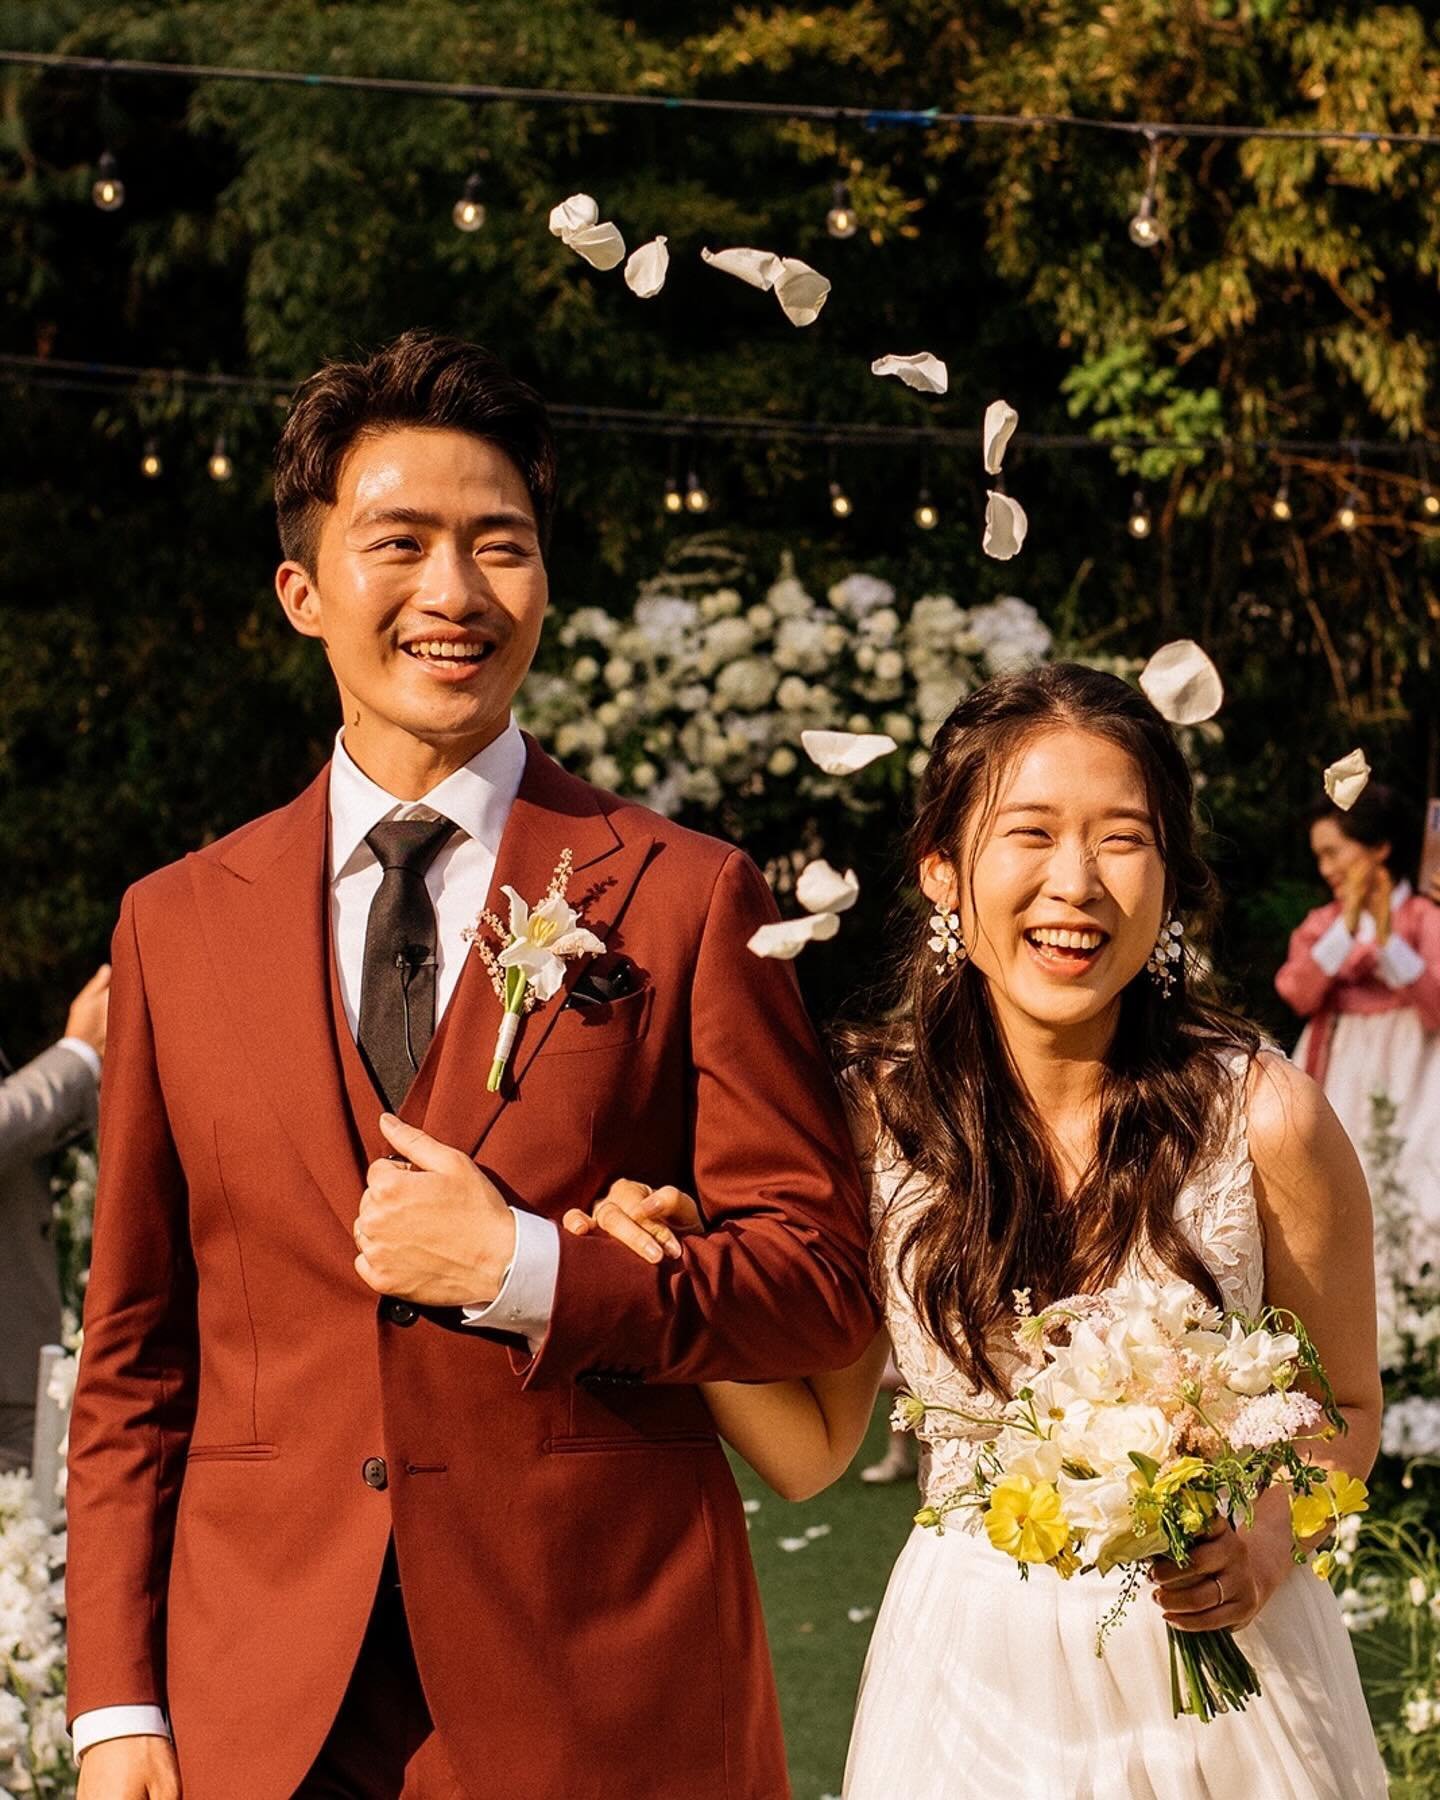 This beautiful destination wedding is finished, and delivered! As far as April weddings go, this momentous affair embodied everything; from full florals to bright spring sunshine, to perfectly timed rose petals being tossed as the happy couple walked